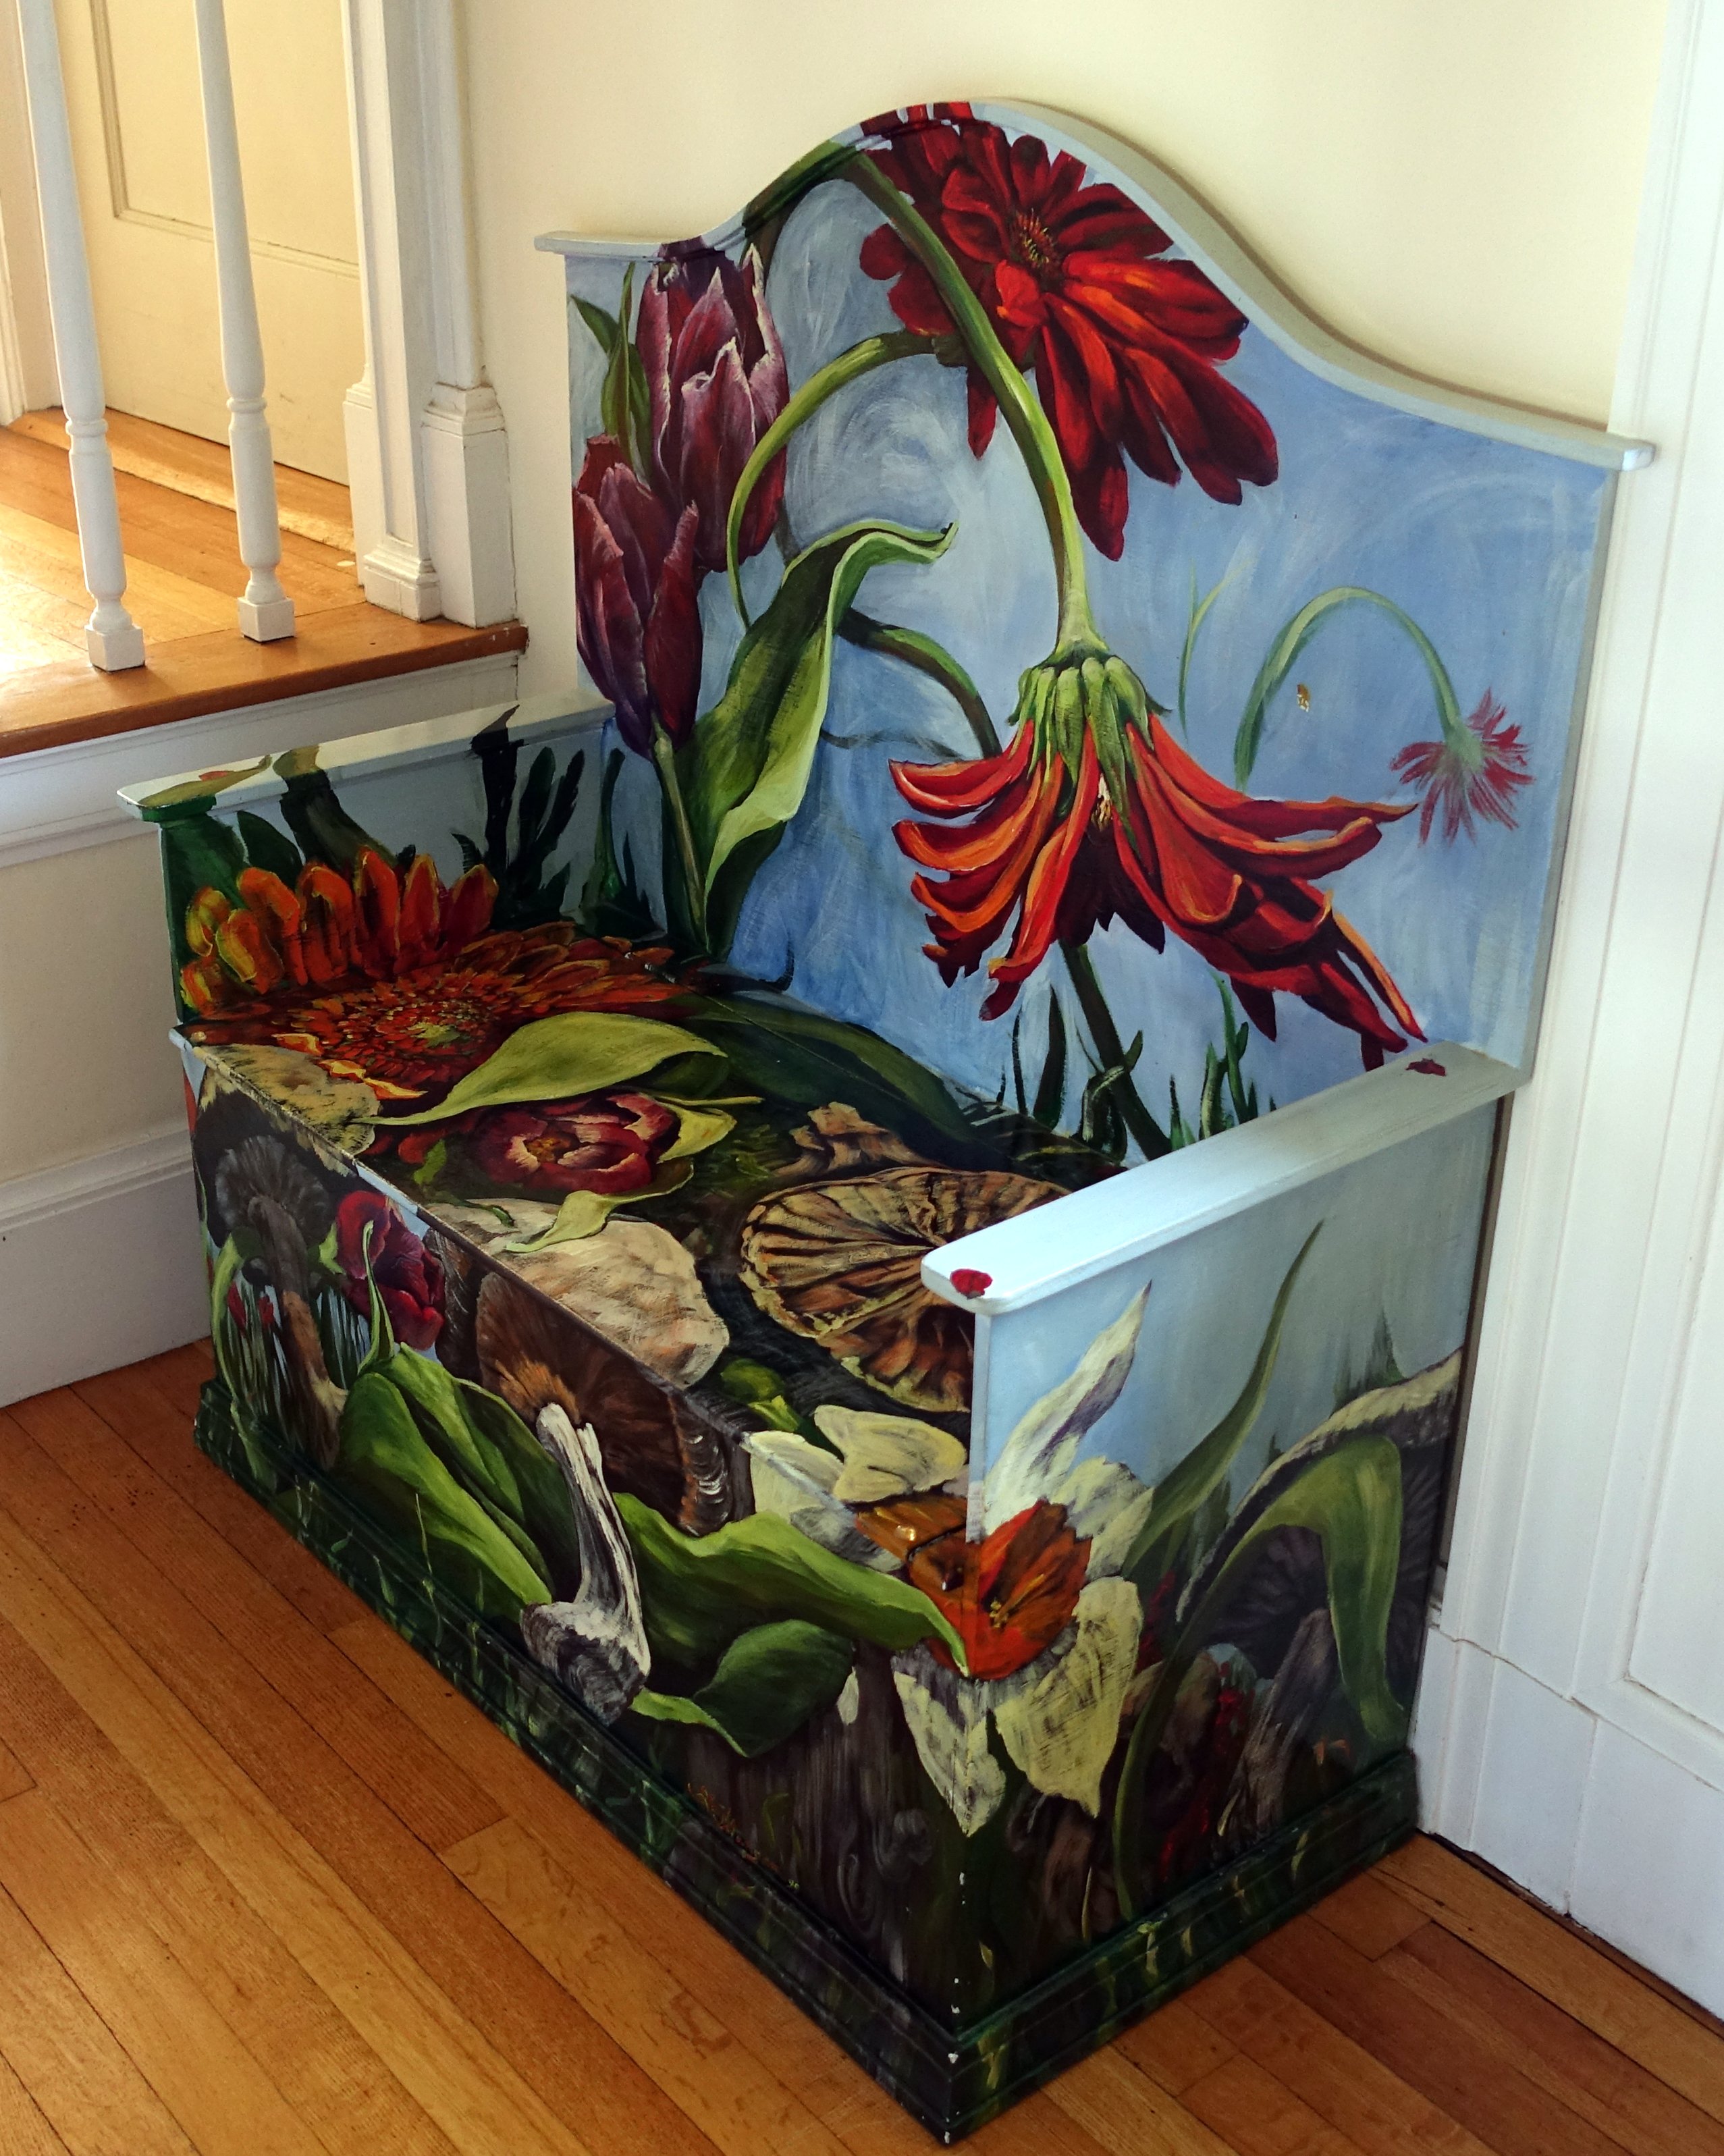 <a href='https://gaylemangankassal.com/'>Gayle Mangan</a> painted this toy chest that I designed and built